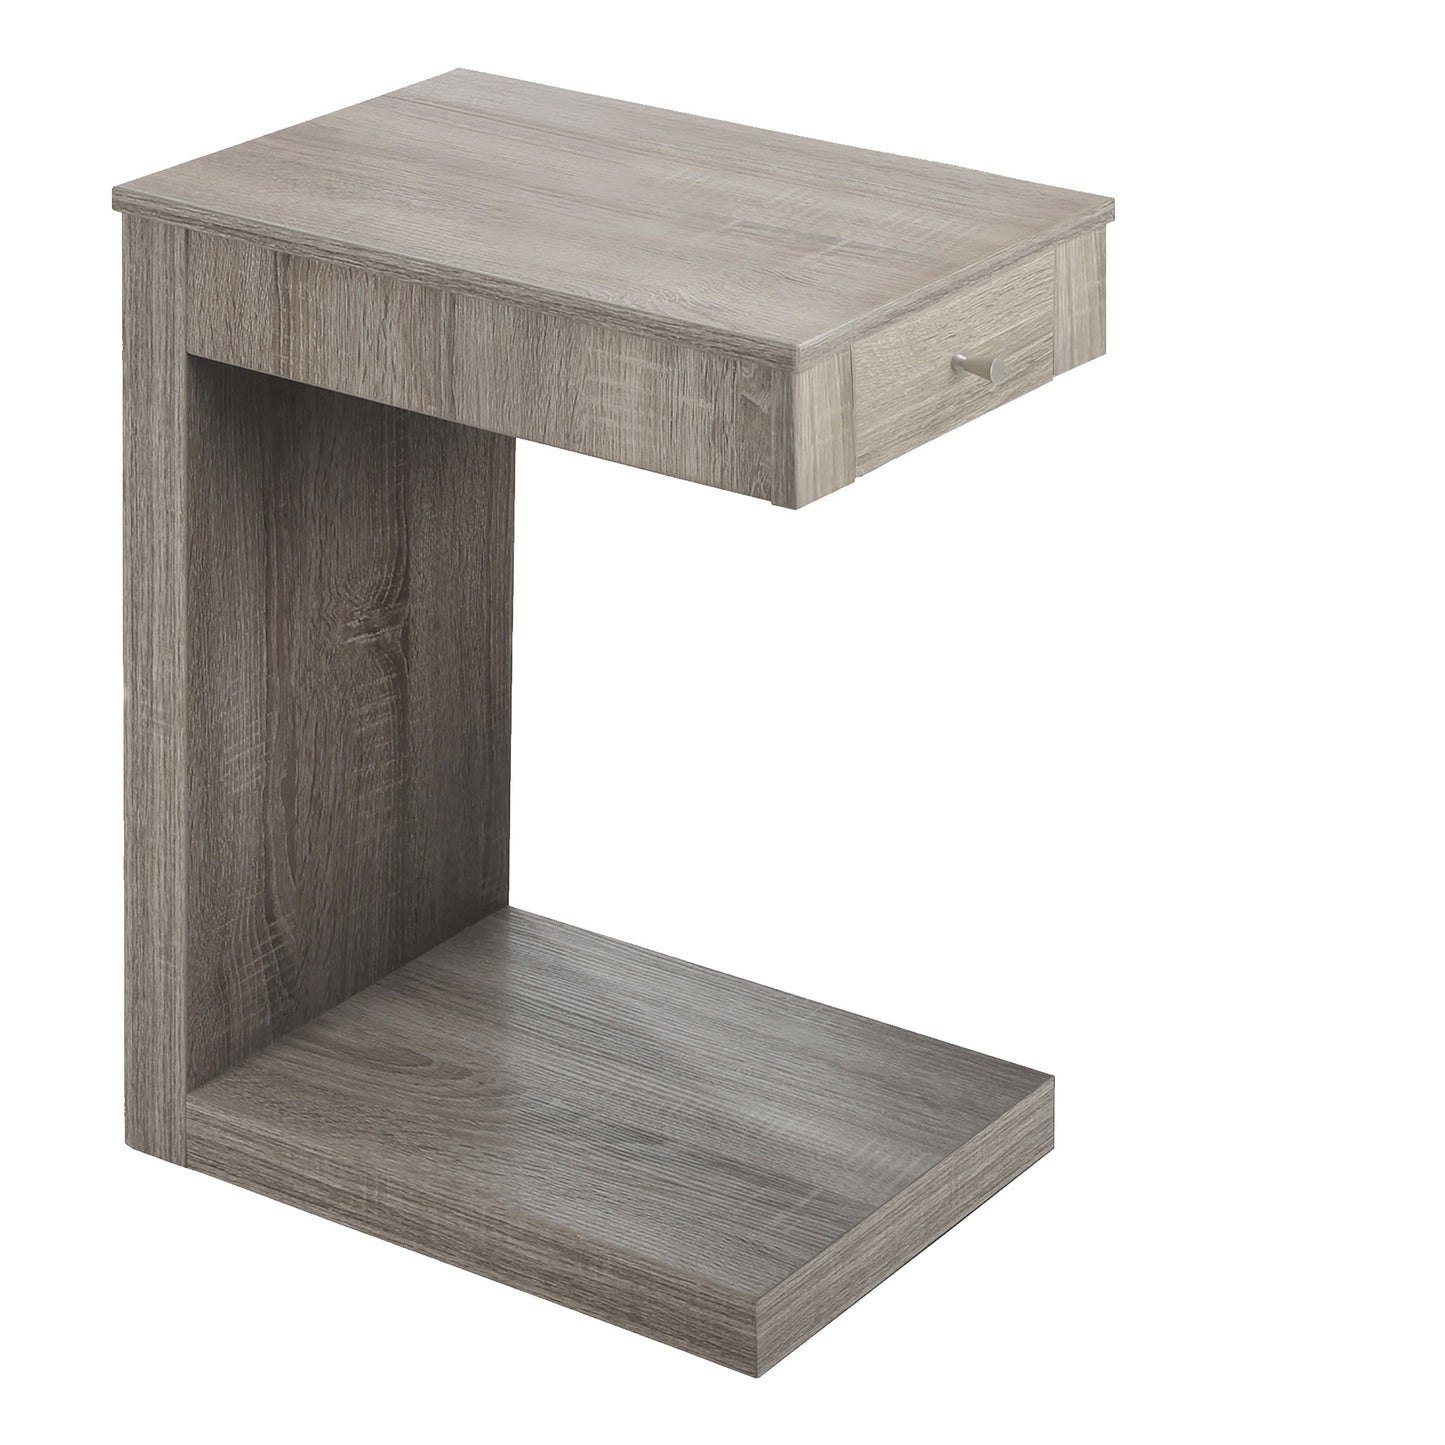 12” L / 24” H Modern C-Style Rubberwood End Table with Pullout Drawer